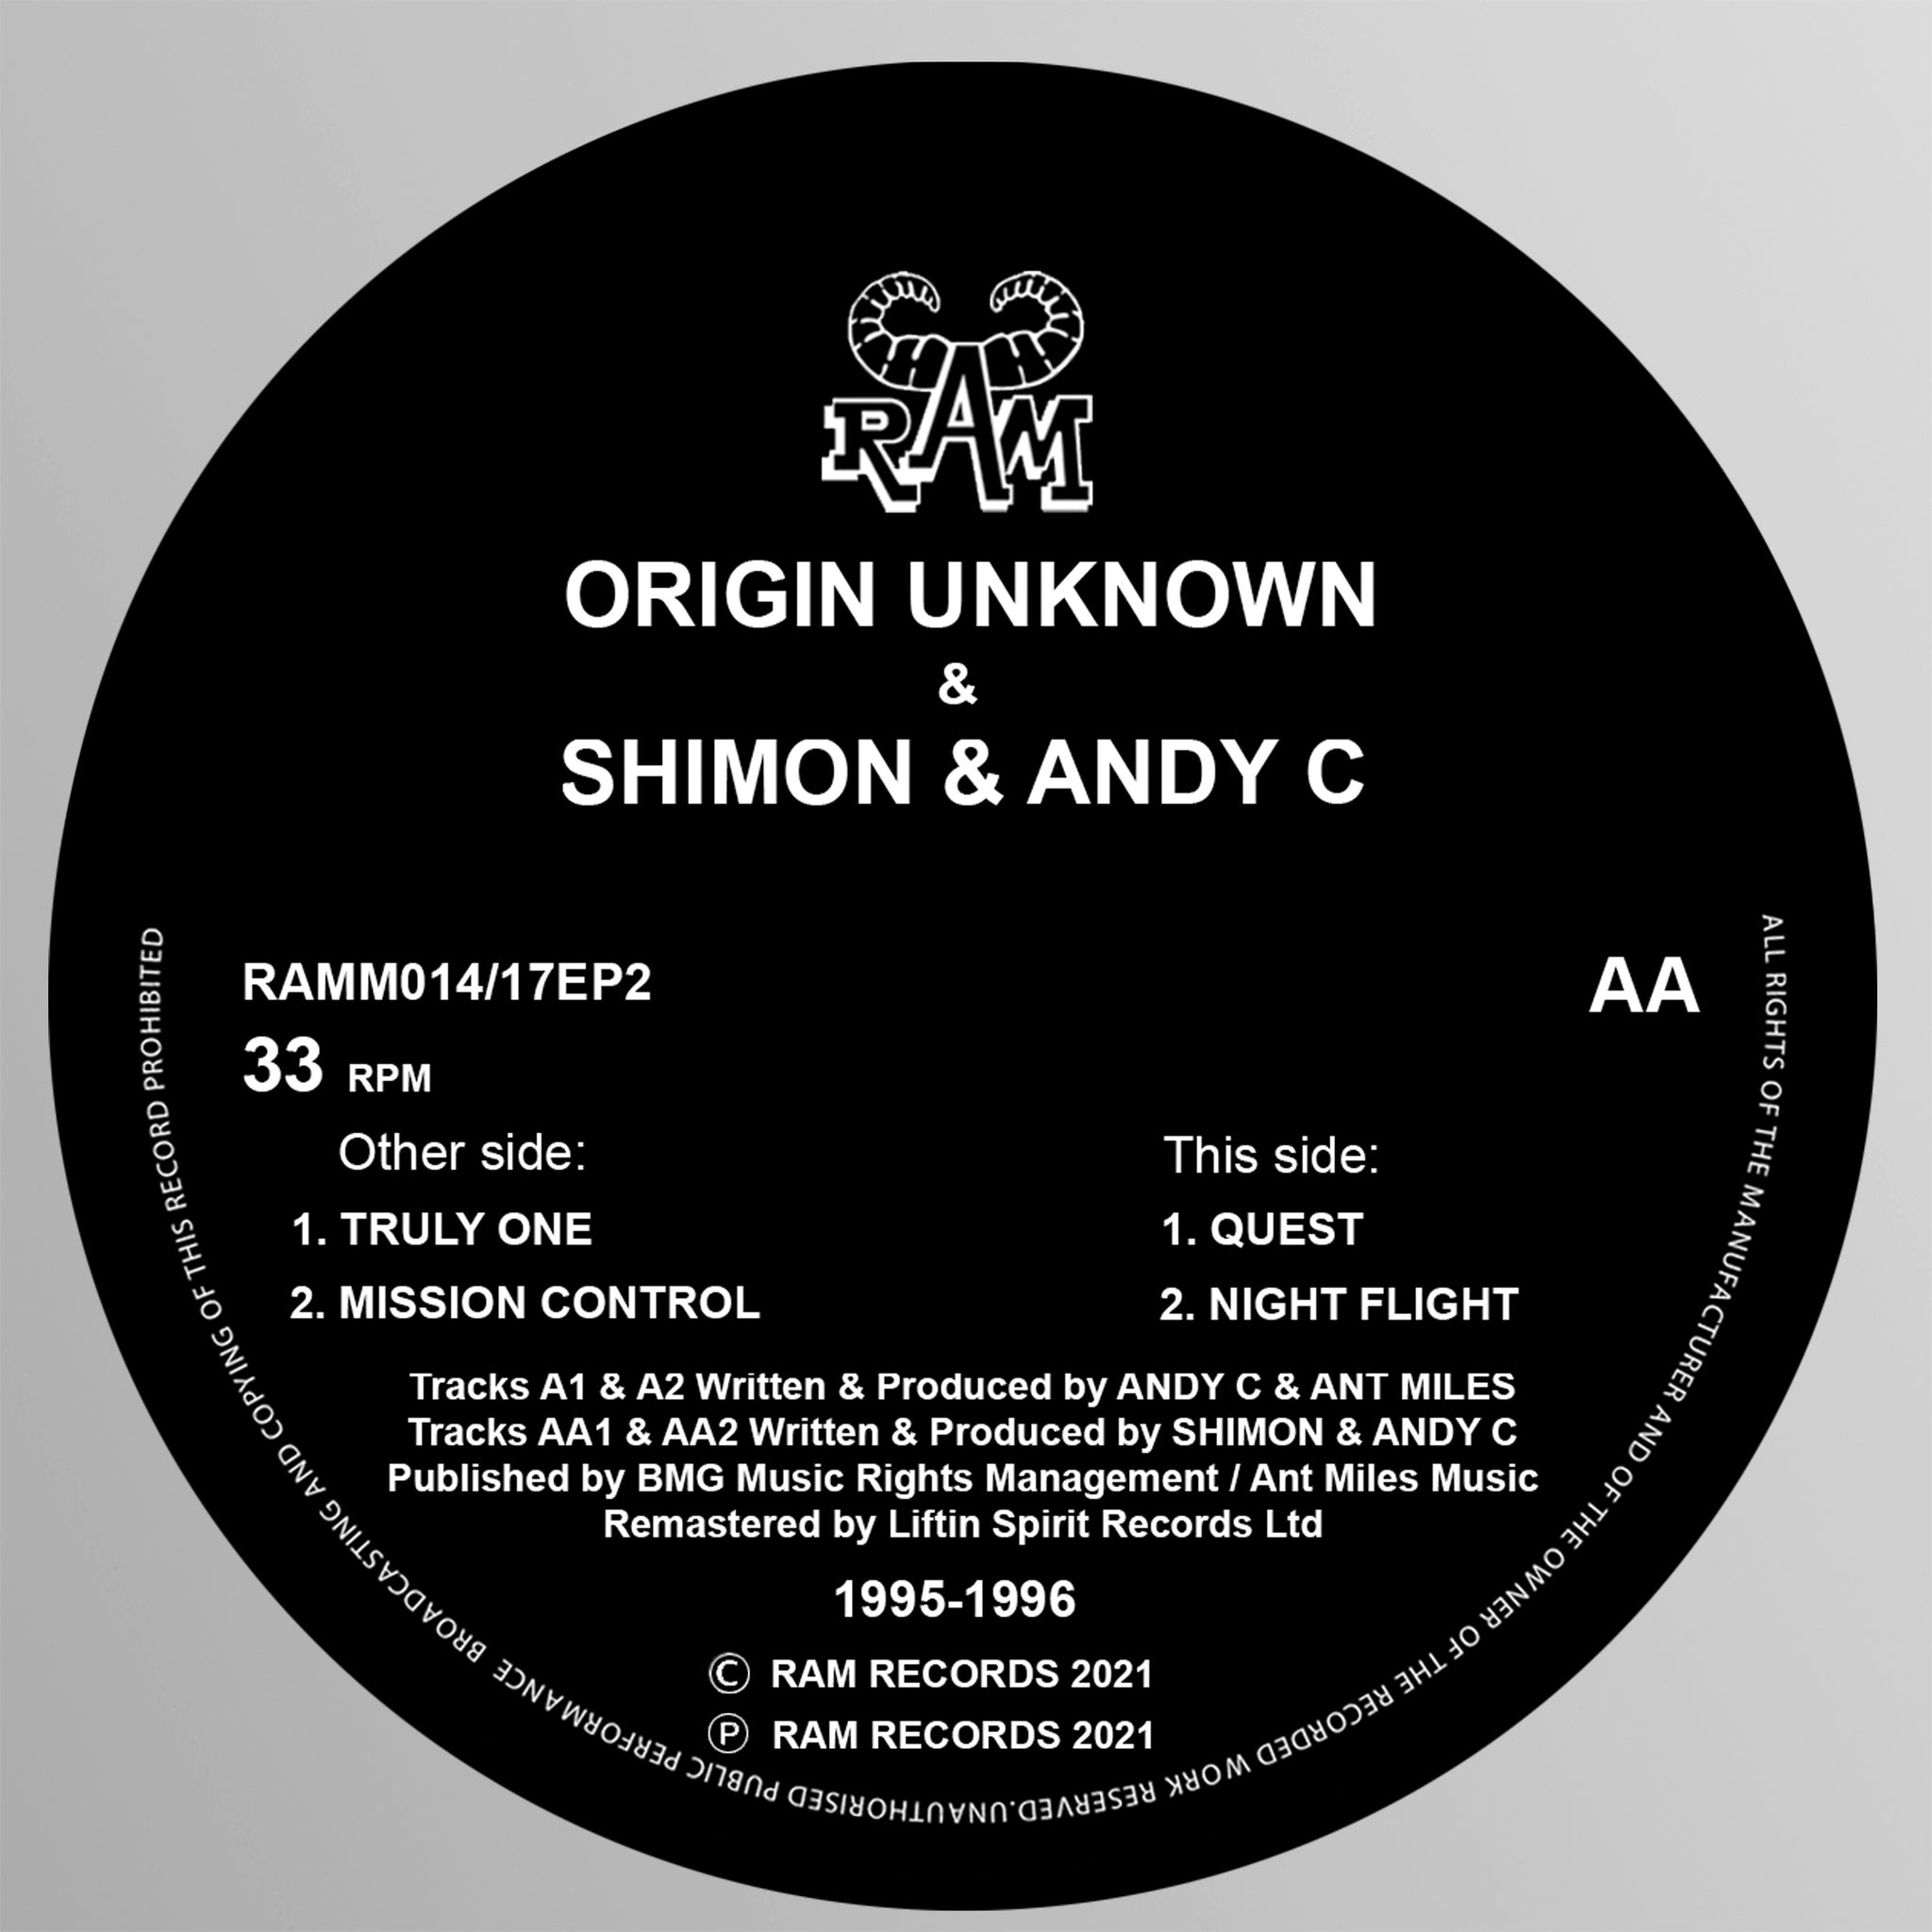 ORIGIN UNKNOWN / SHIMON & ANDY C 'TRULY ONE / MISSION CONTROL / QUEST / NIGHT FLIGHT' 12" (REISSUE)